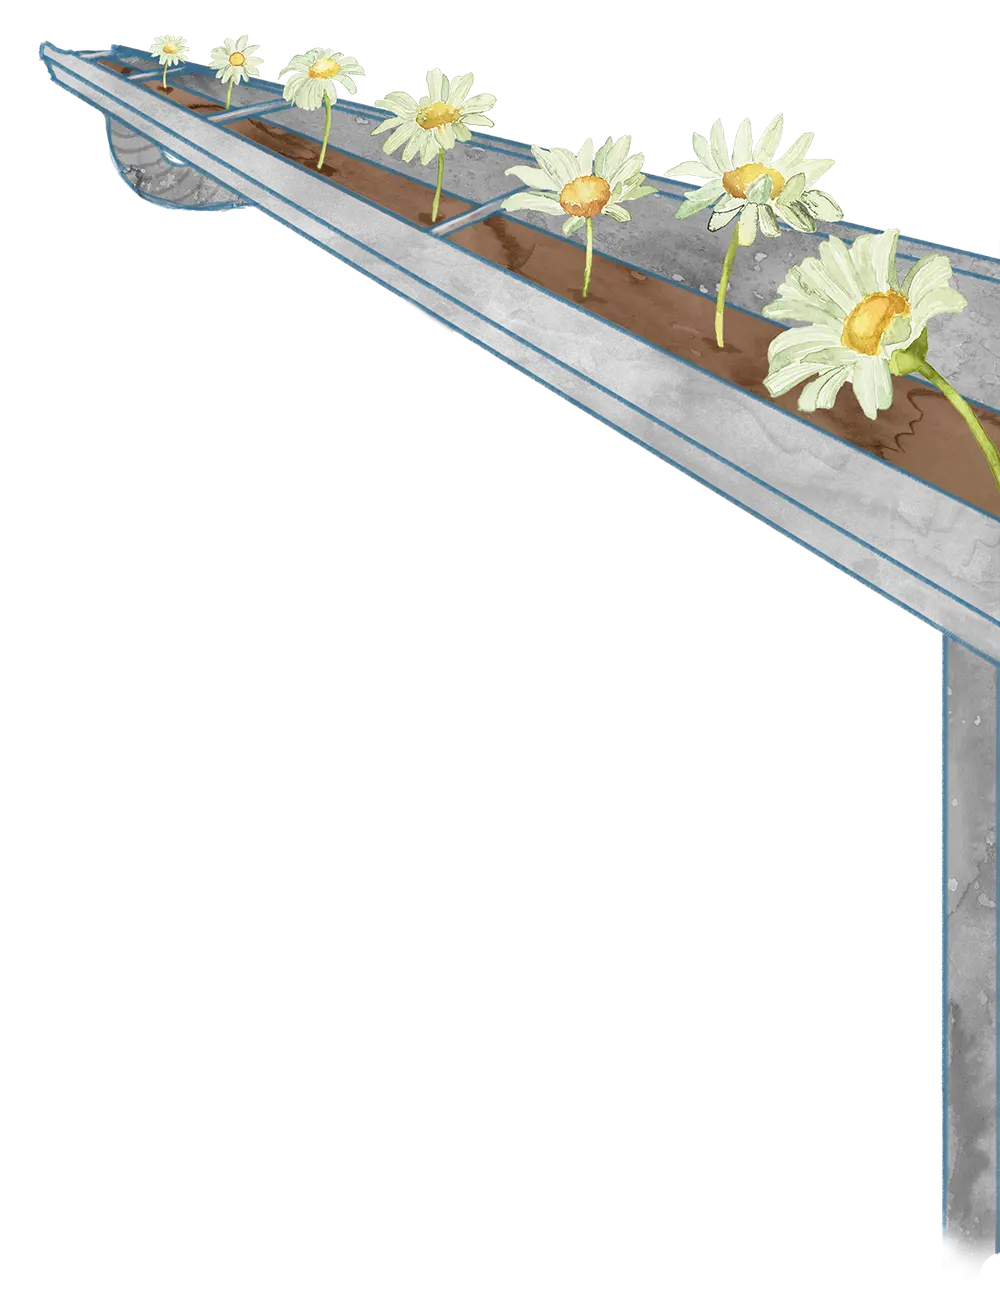 vectorized gutter with dirt and flowers growing out of it